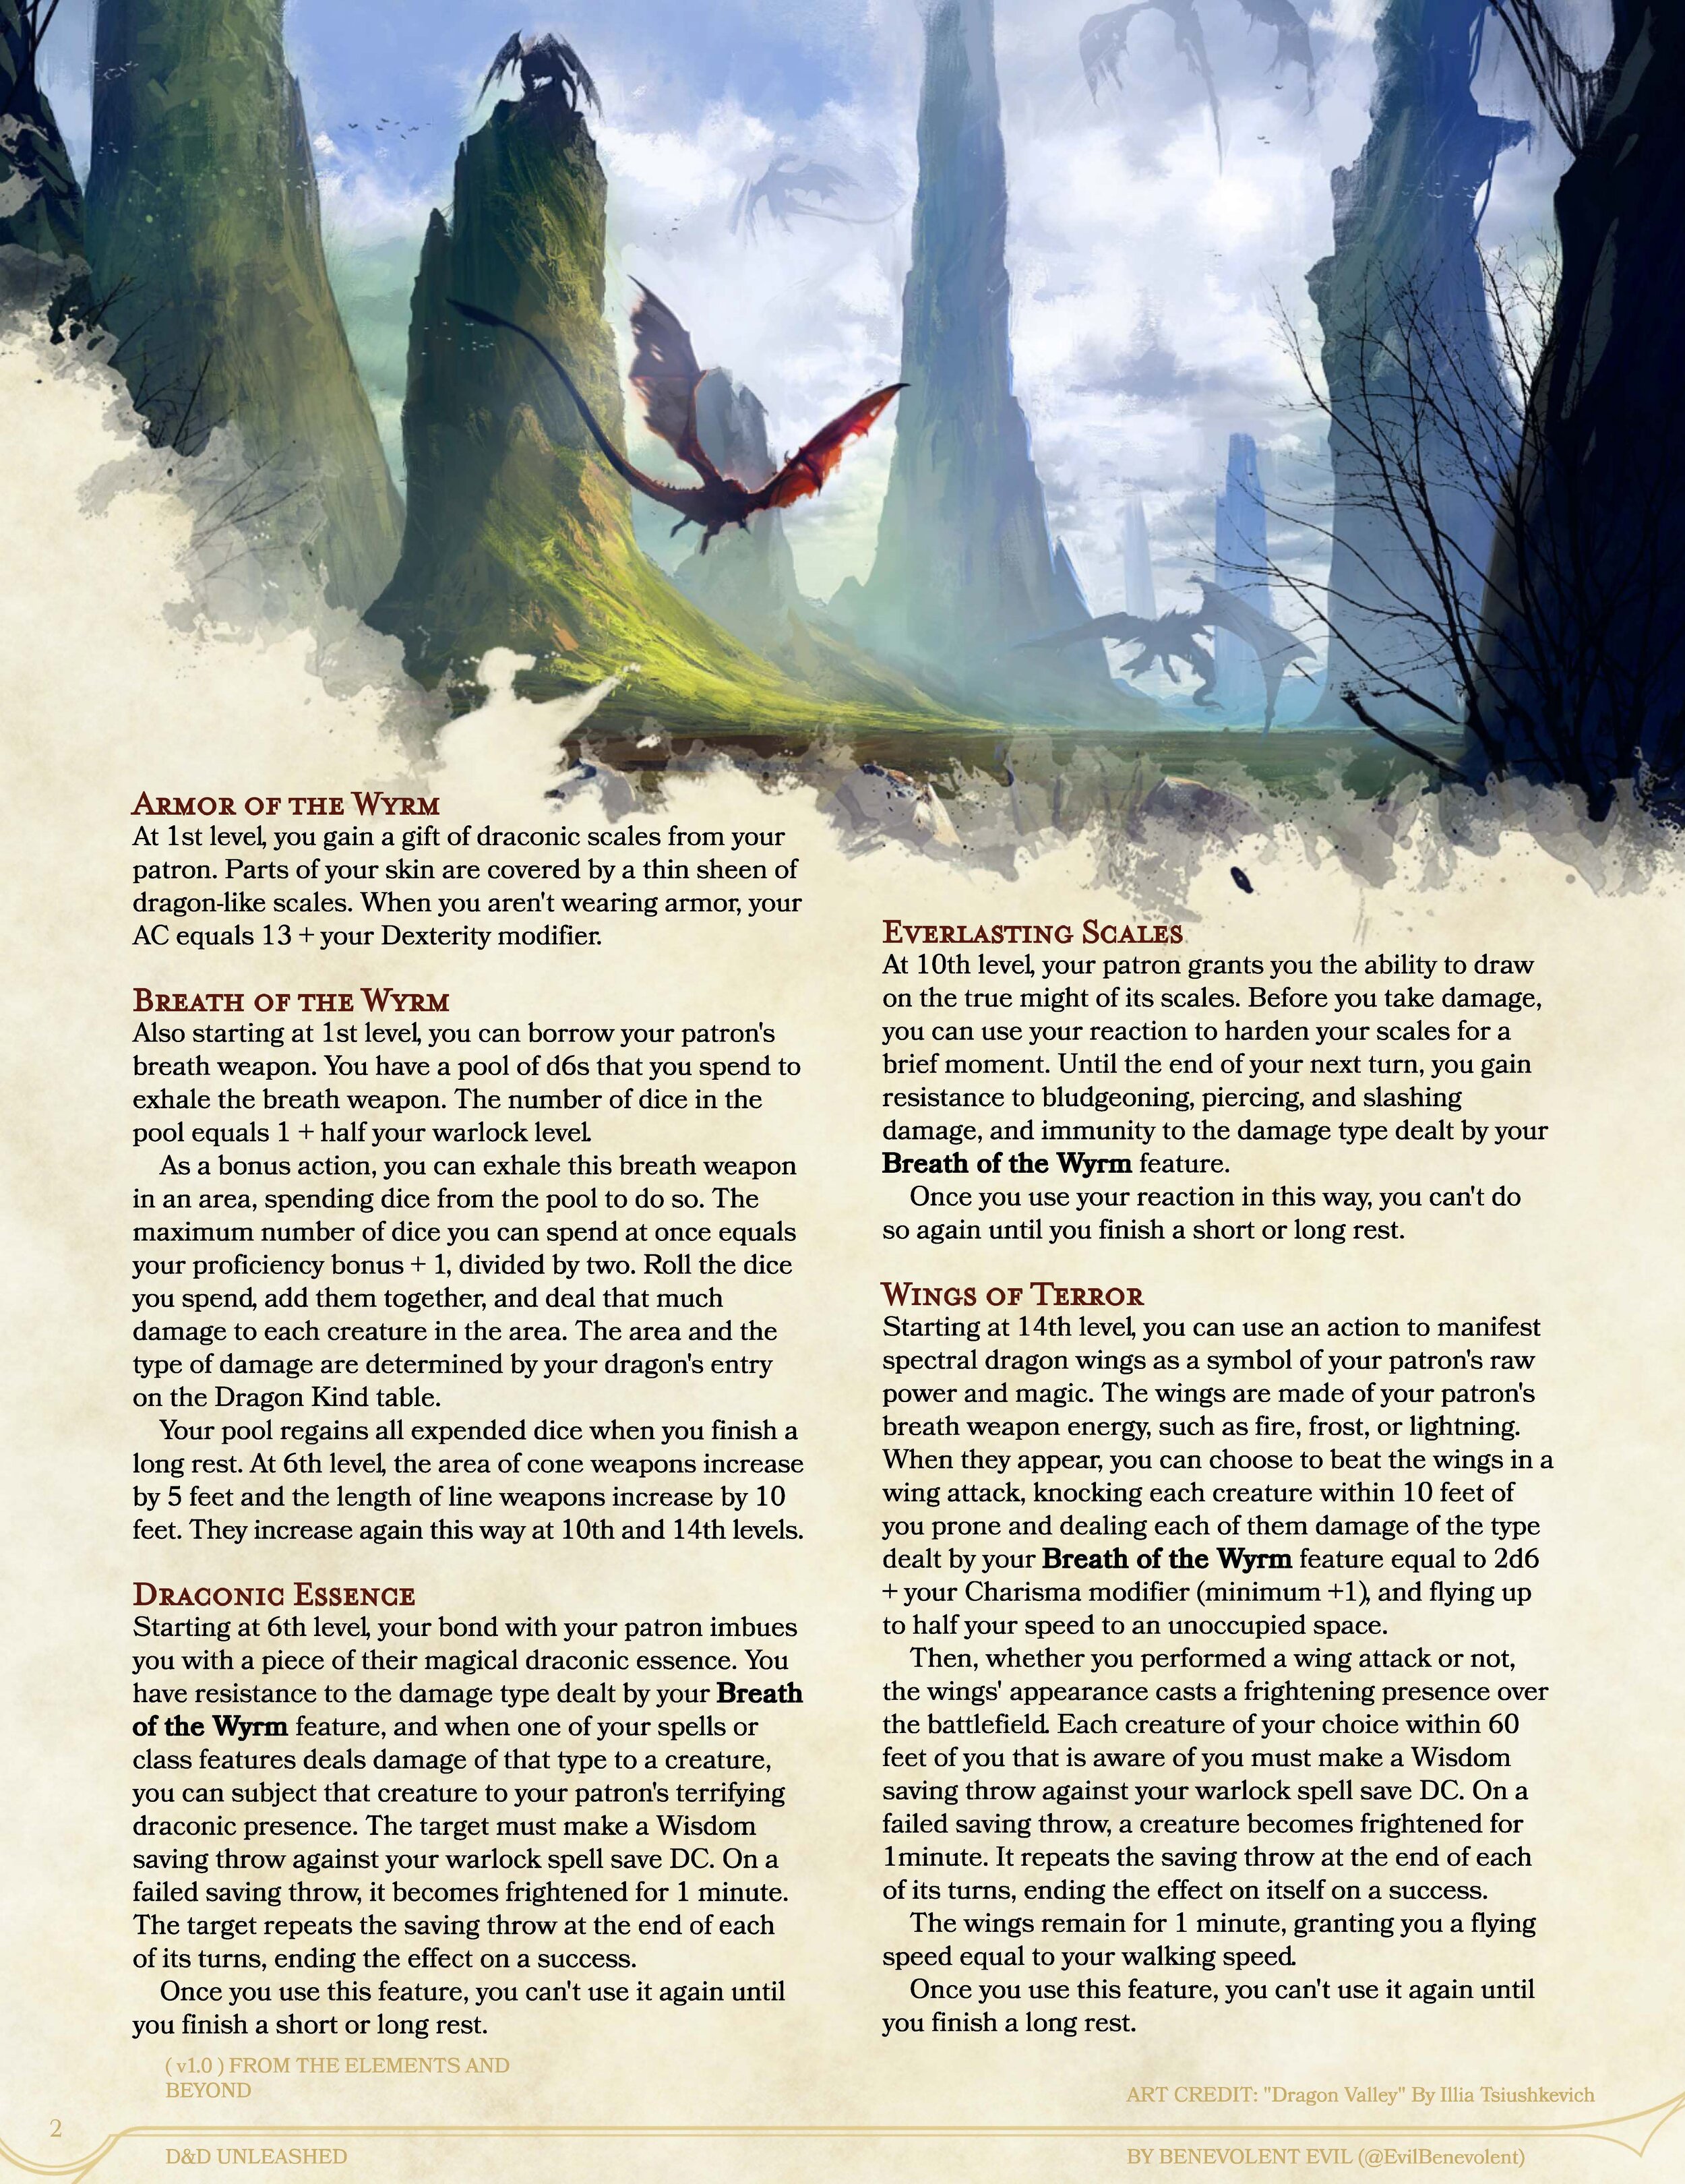 D&D Unleashed - The Dragon Patron Warlock (1p0)_Page_2.jpg